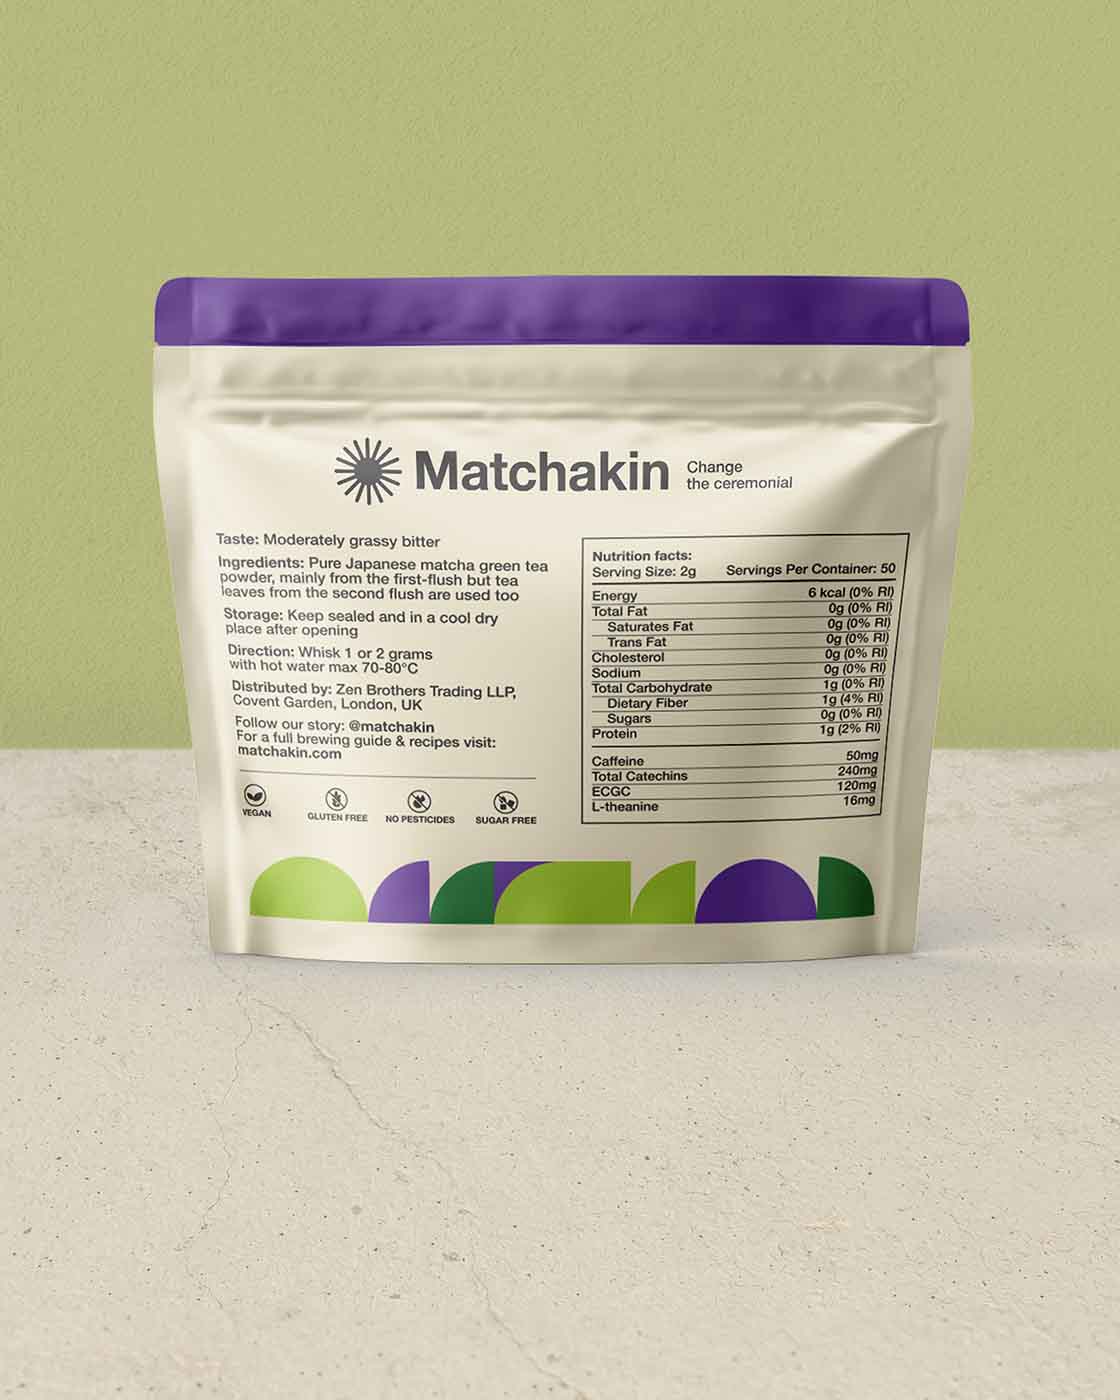 Matchakin Organic Premium Culinary Matcha, the perfect choice for baking and creative cooking, 100 grams pouch bags